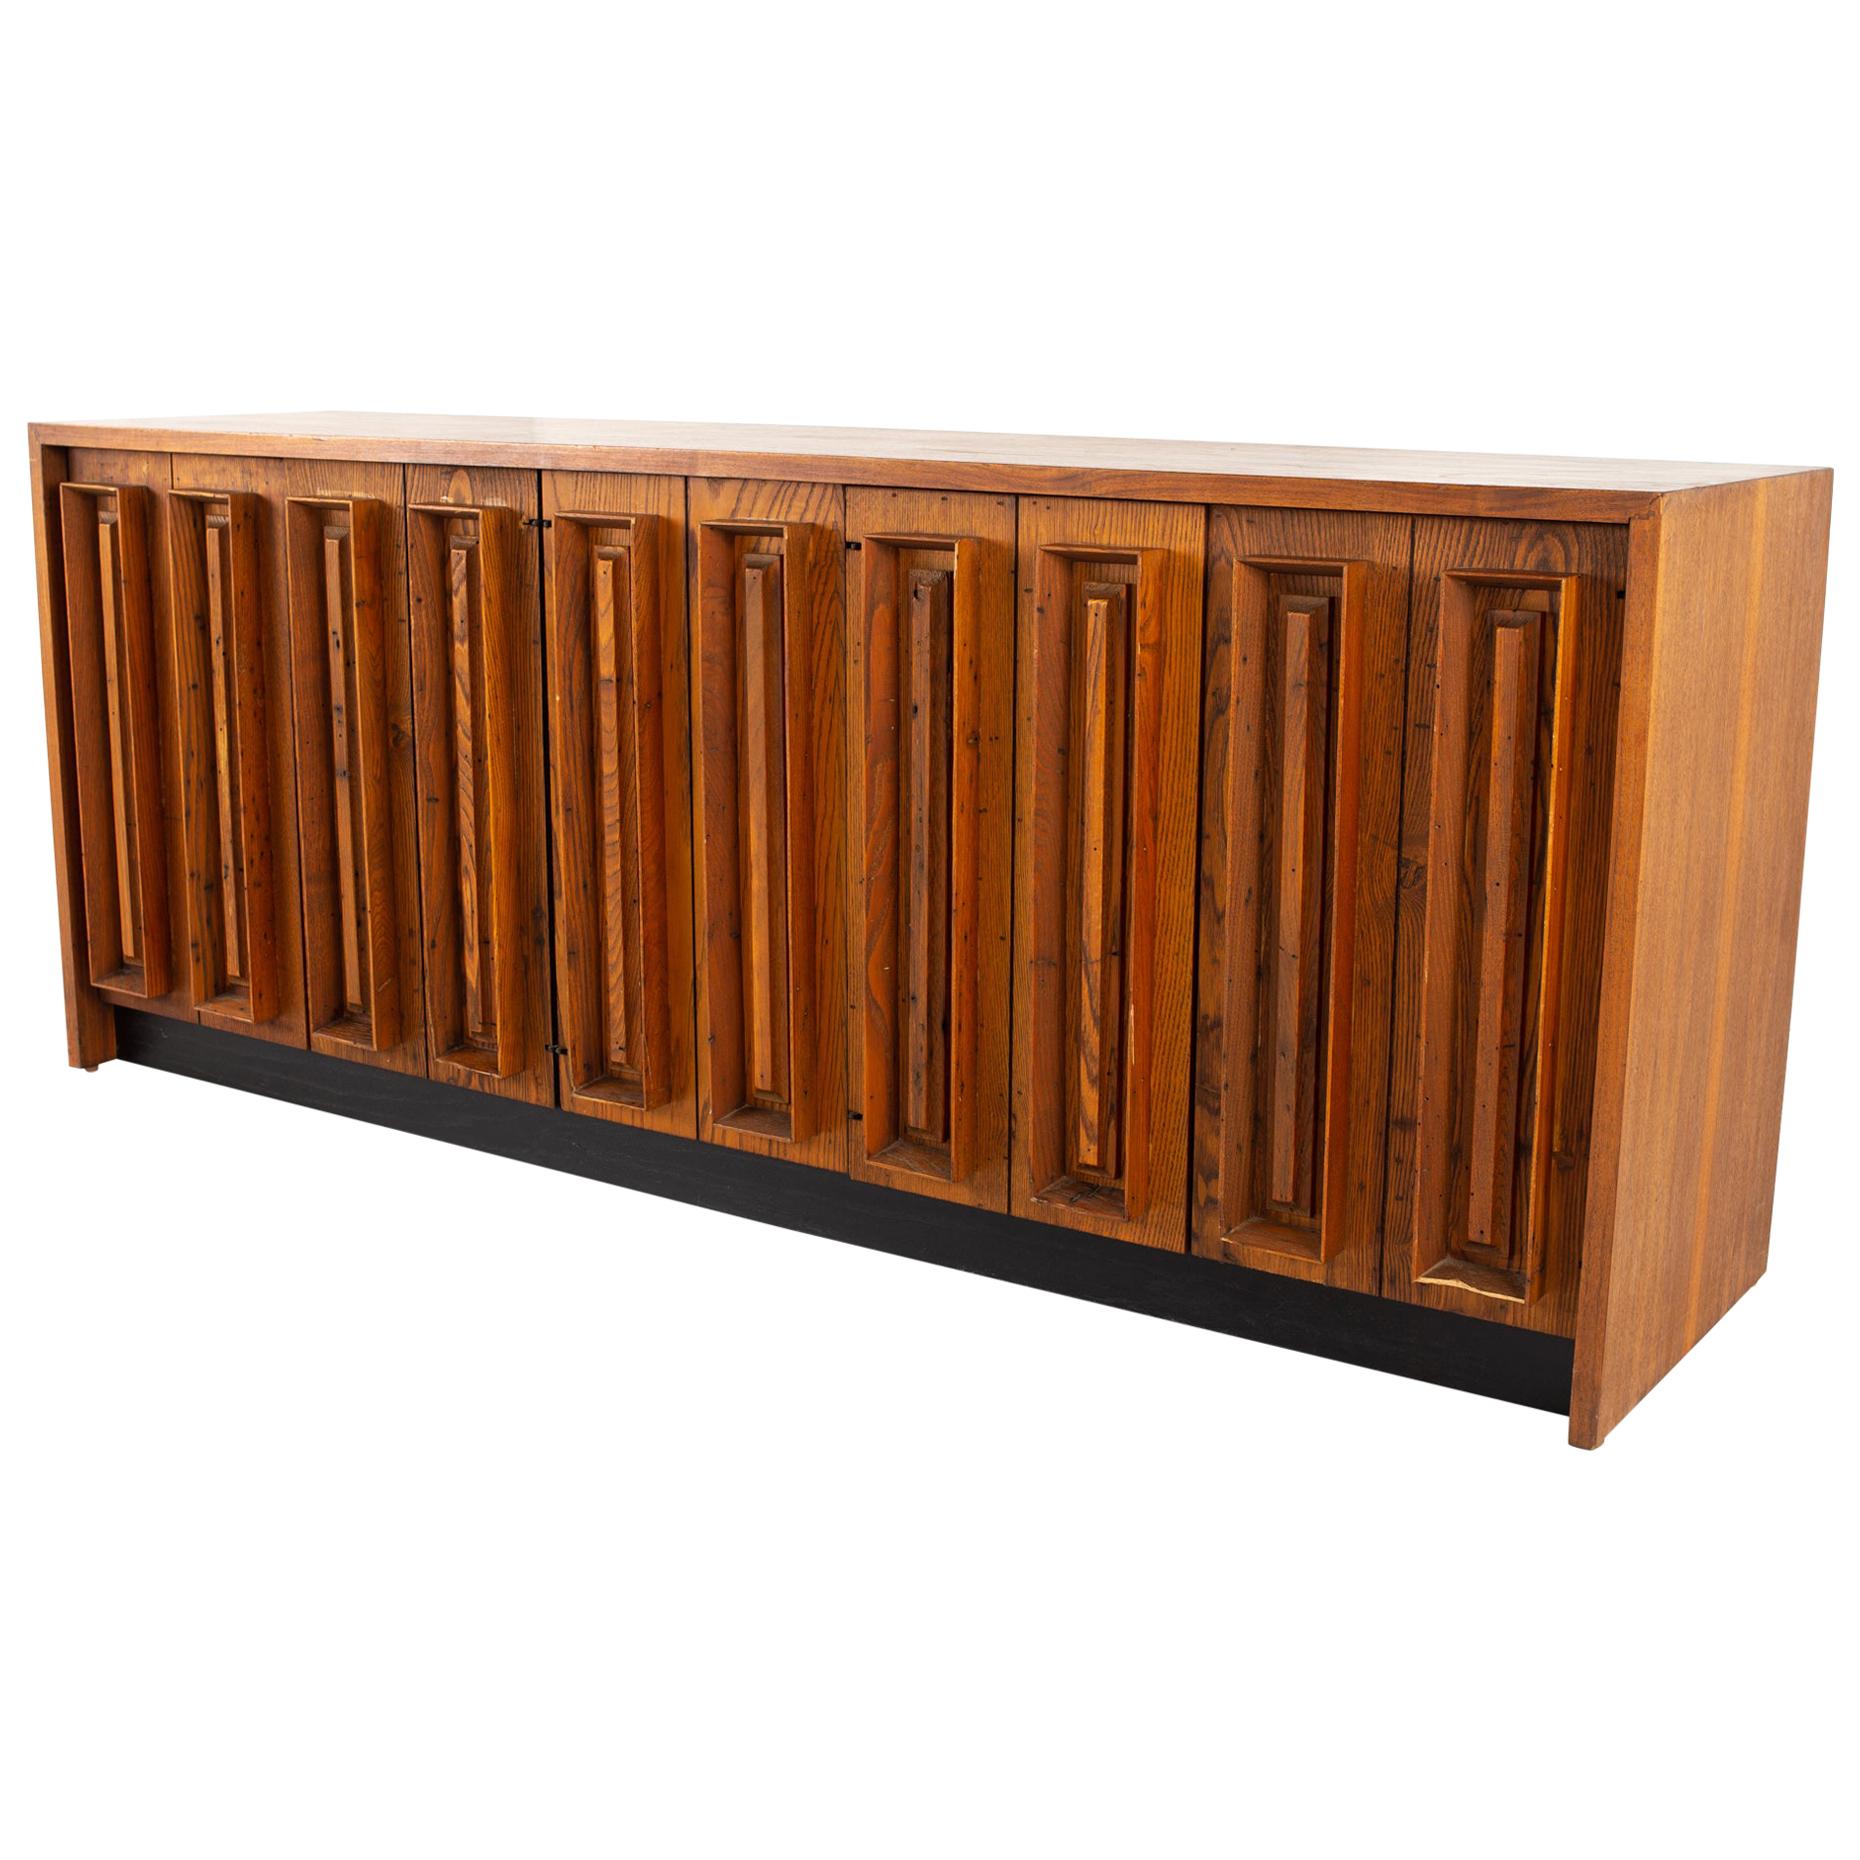 Dillingham Midcentury Pecky Cypress and Walnut Sideboard Credenza Buffet